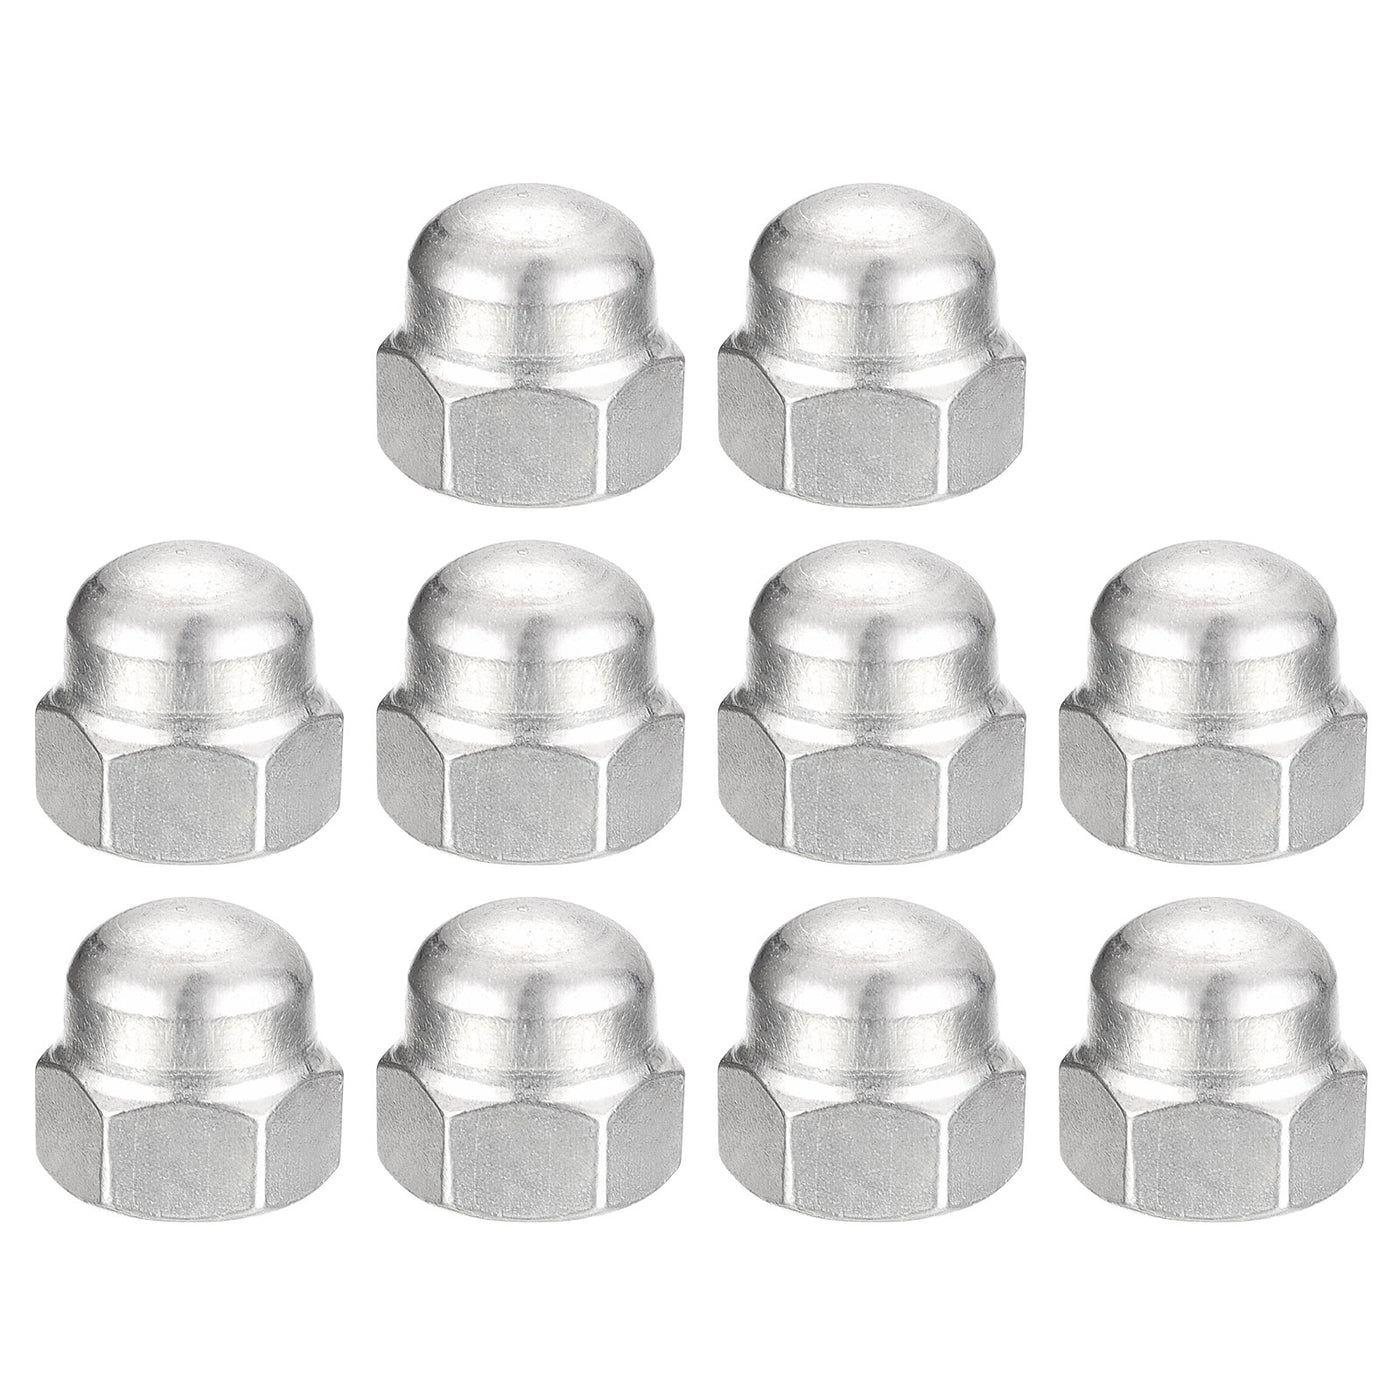 uxcell Uxcell 3/8-16 Acorn Cap Nuts,10pcs - 304 Stainless Steel Hardware Nuts, Acorn Hex Cap Dome Head Nuts for Fasteners (Silver)